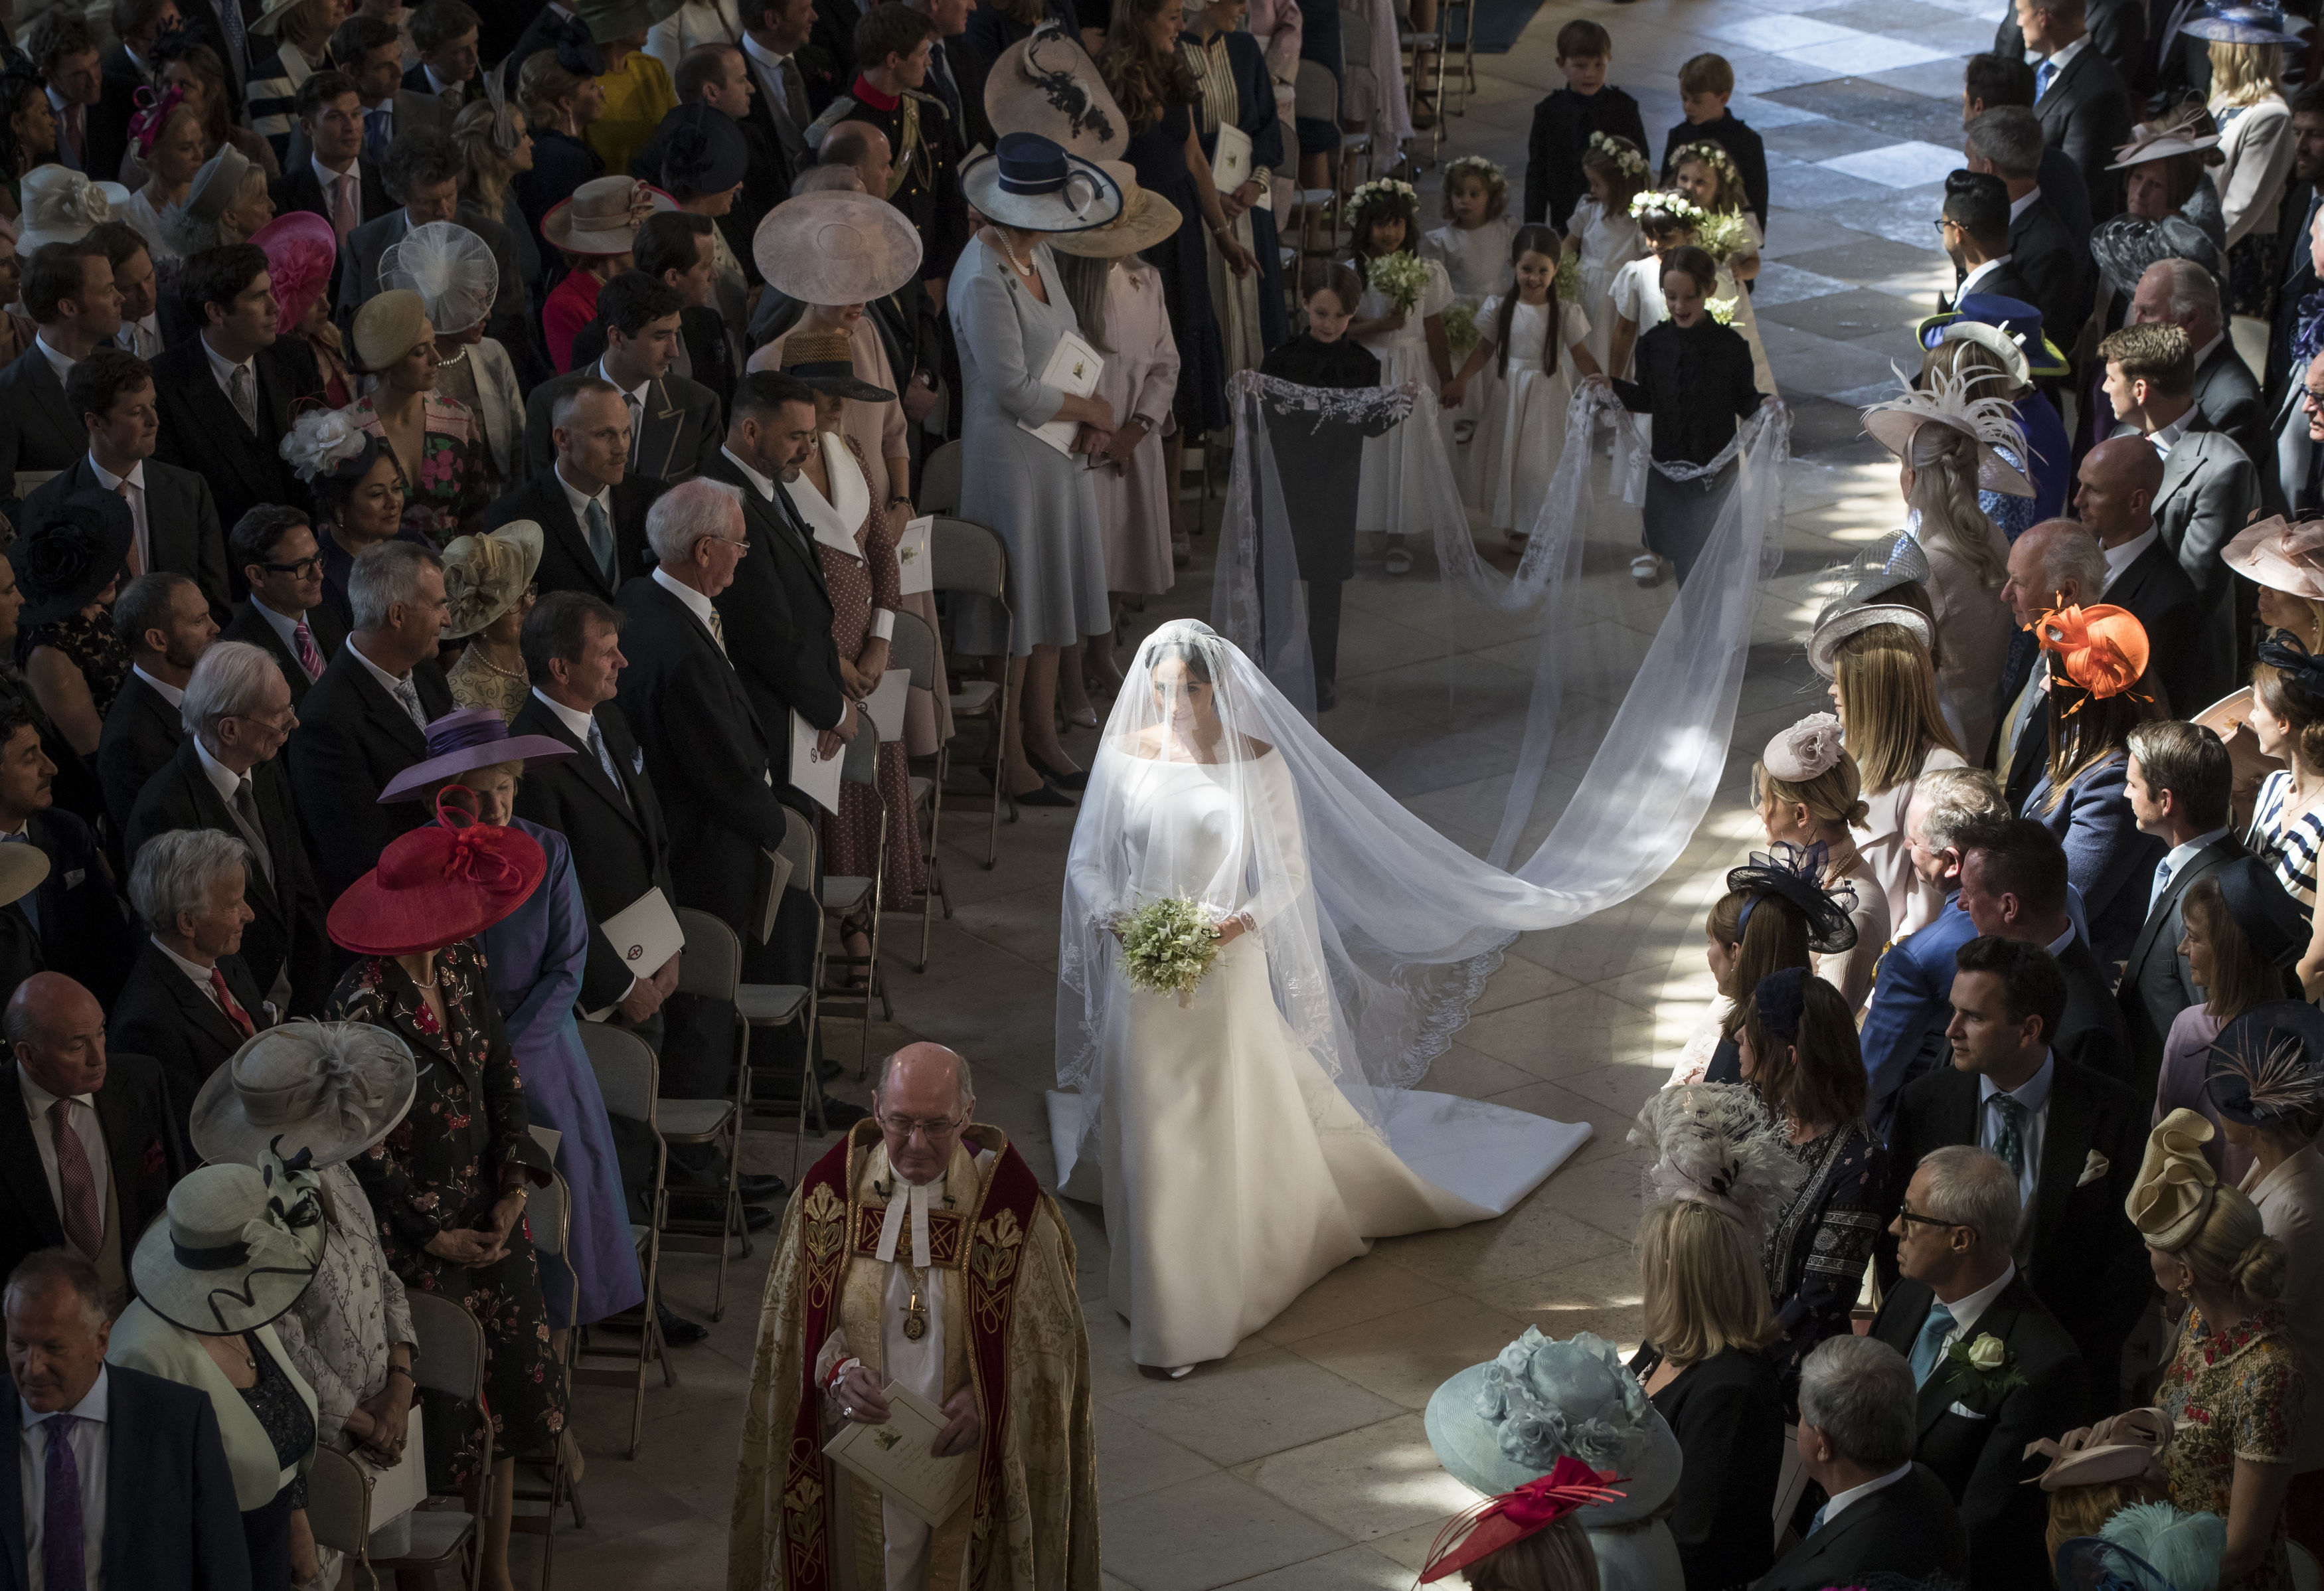 Meghan, Duchess of Sussex walking down the aisle